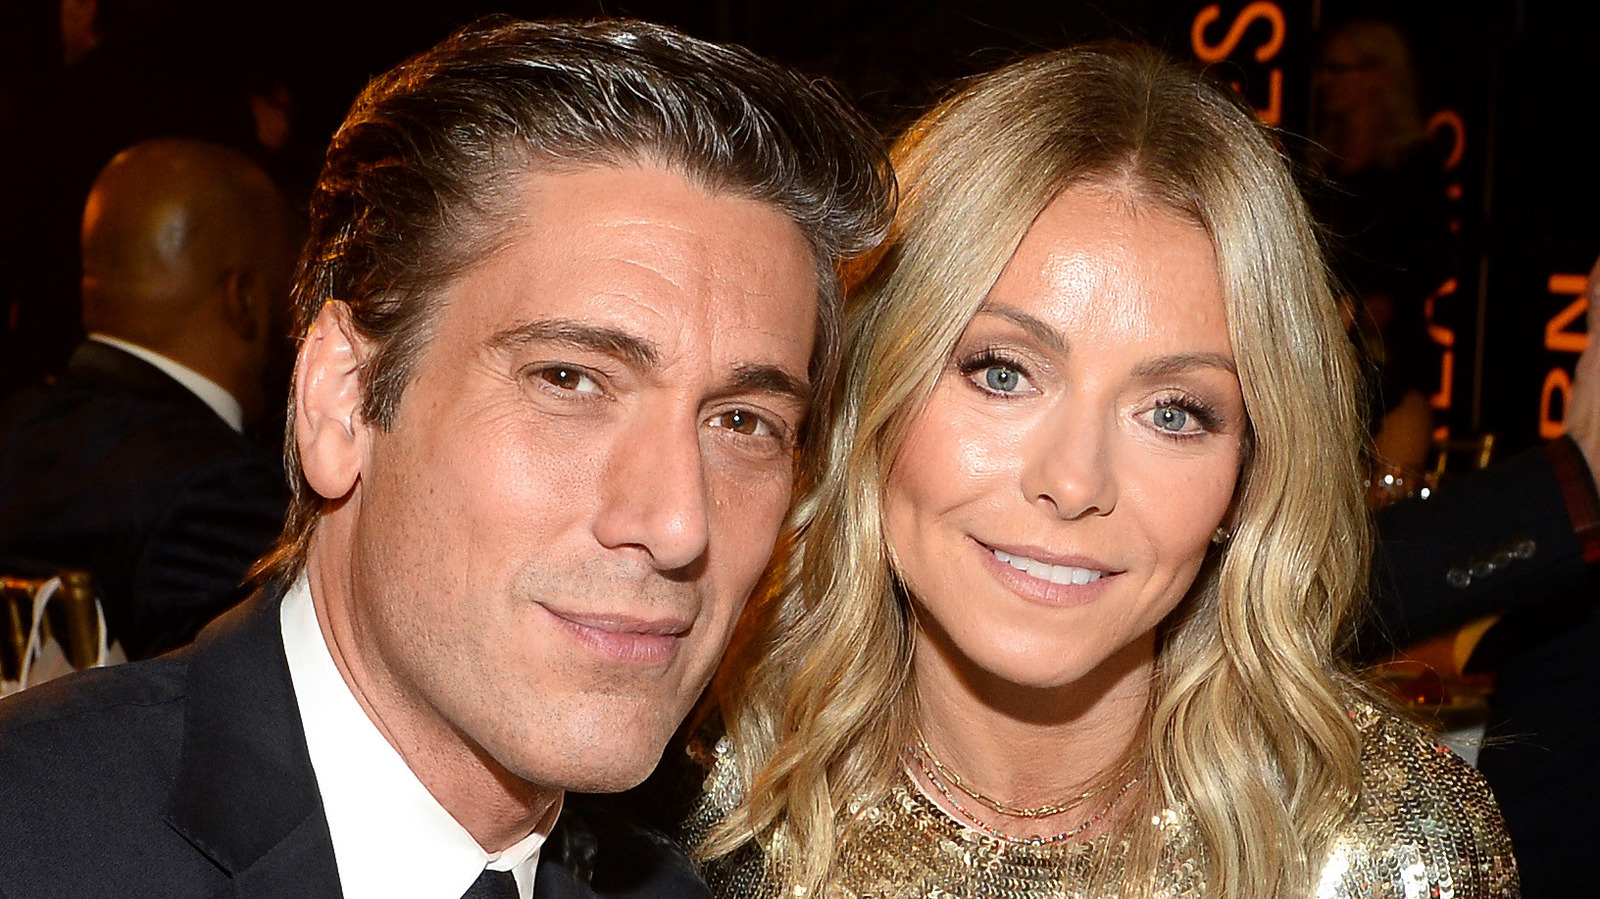 The Truth About Kelly Ripa And David Muirs Relationship